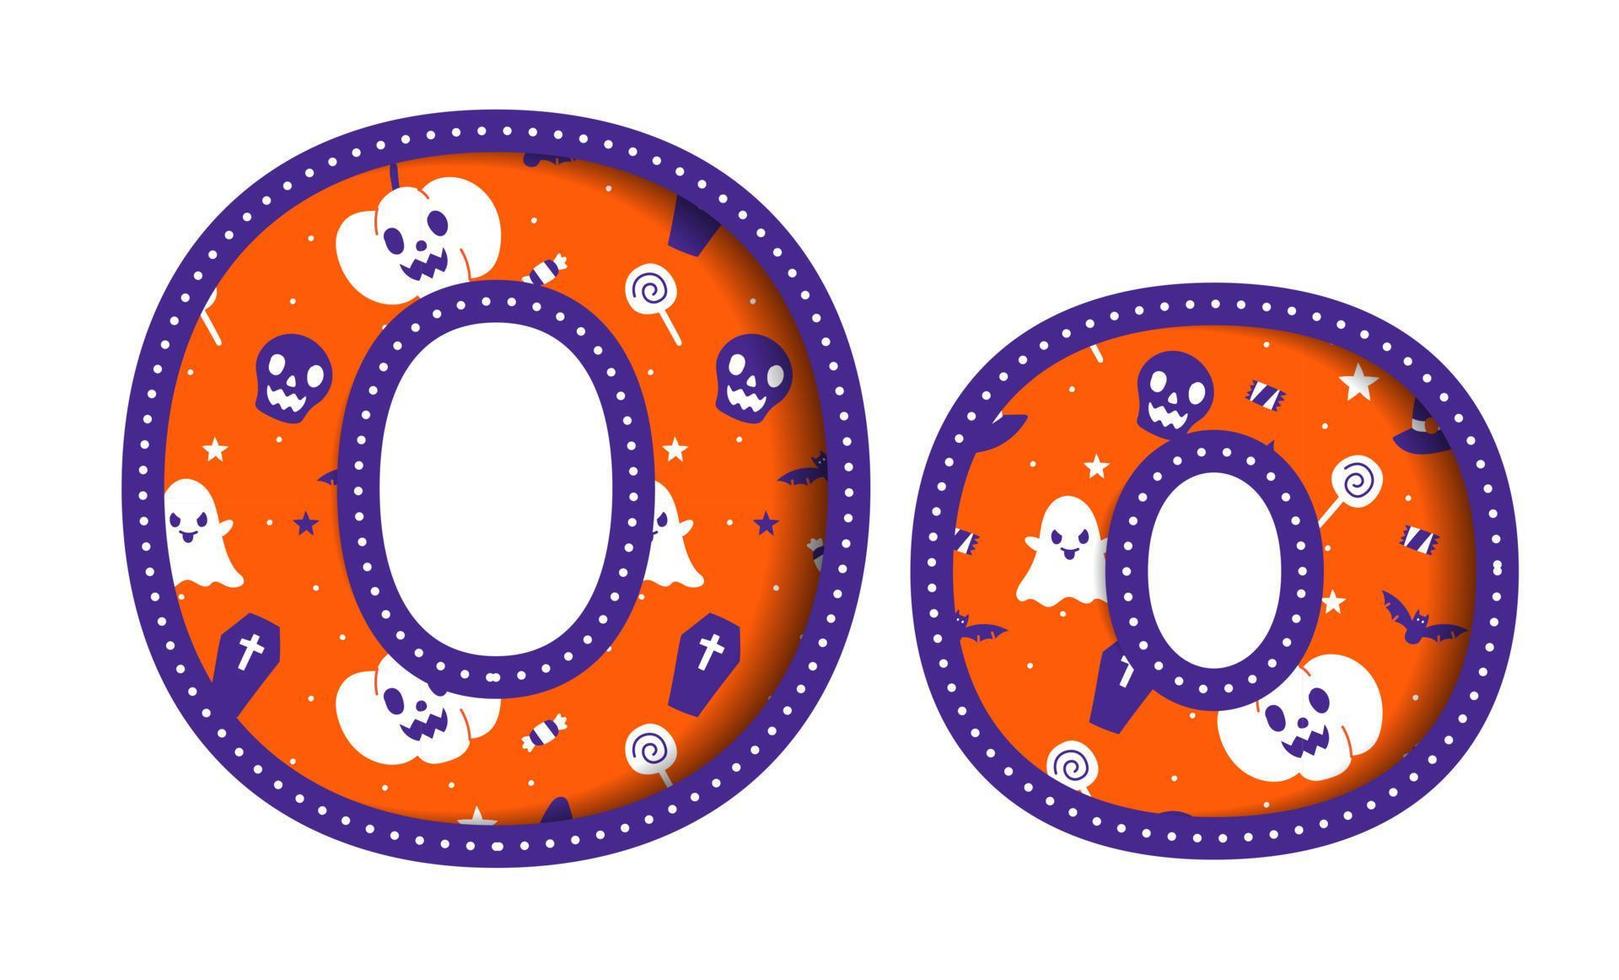 Cute Happy Halloween O Alphabet Capital Small Letter Party Font Typography Character Cartoon Spooky Horror colorful Paper Cutout Type design celebration vector Illustration Skull Pumpkin Bat Witch Hat